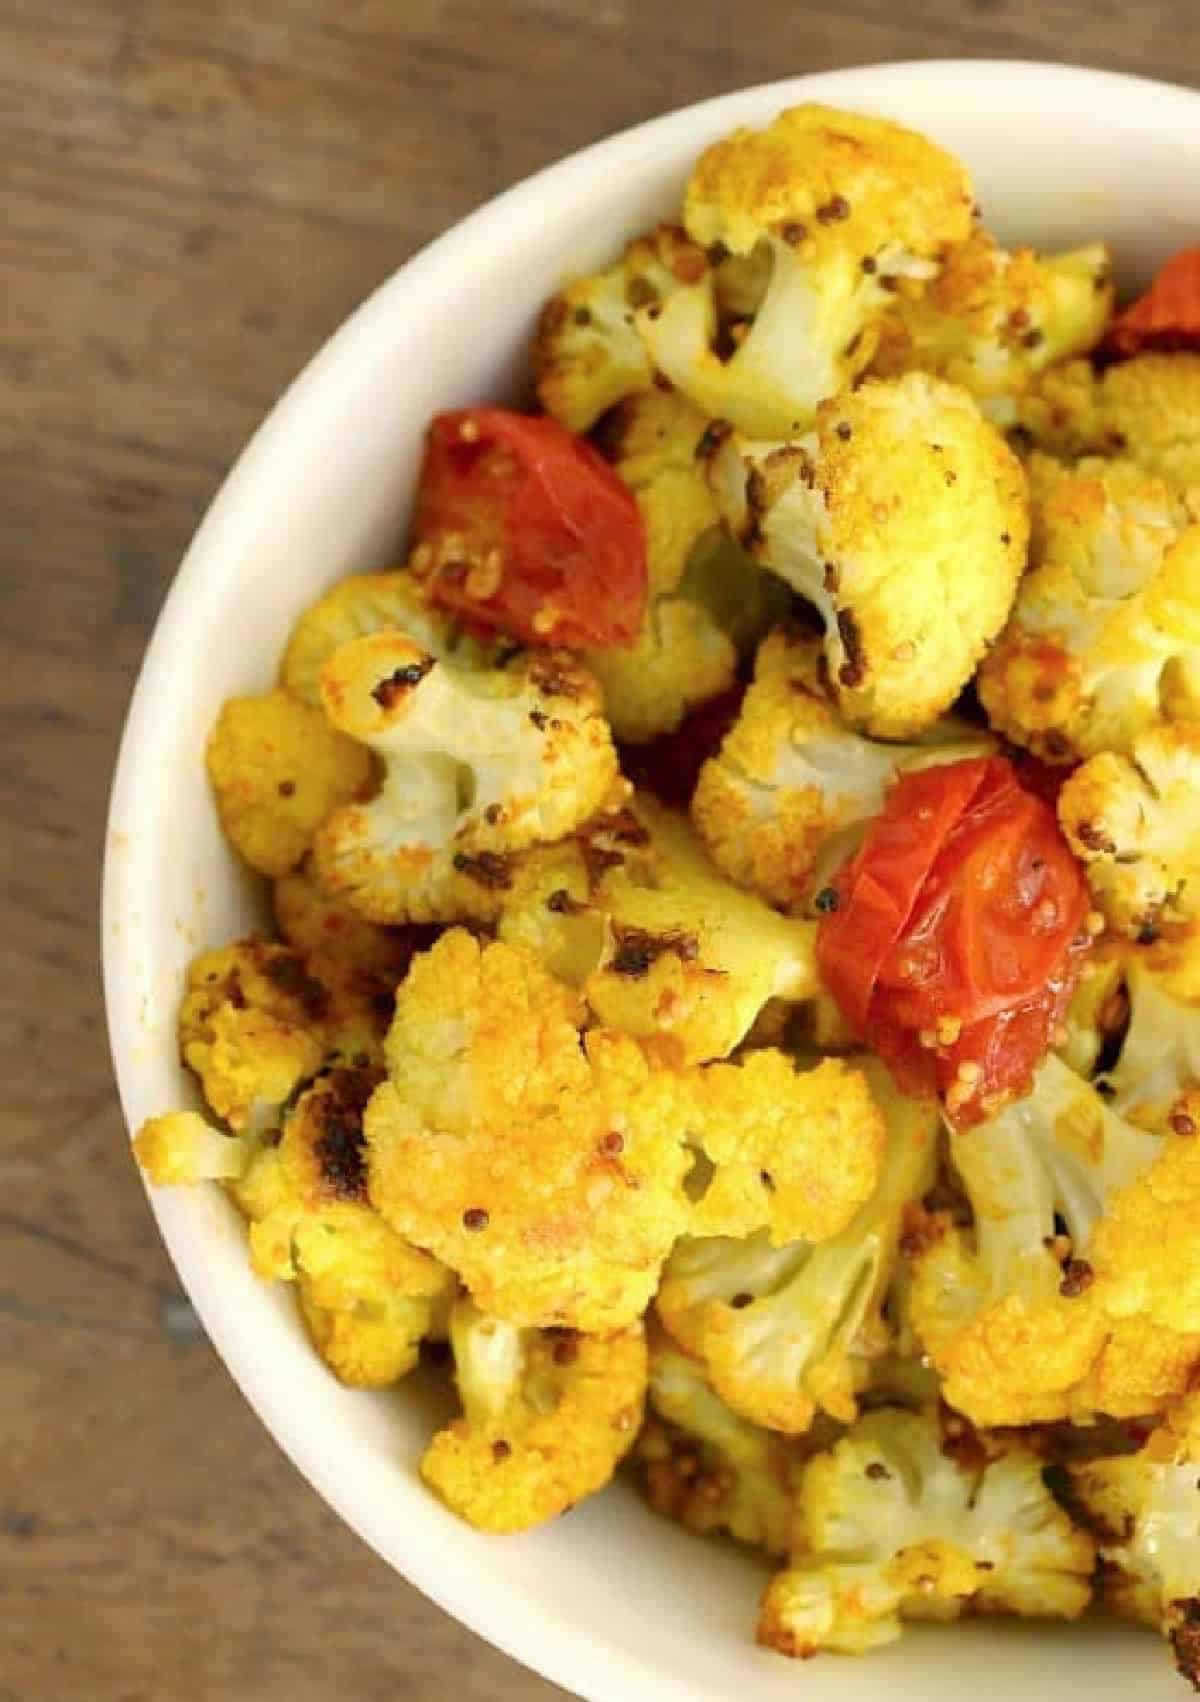 White bowl of yellow cauliflower pieces with tomatoes, on a wooden table. Partial view.